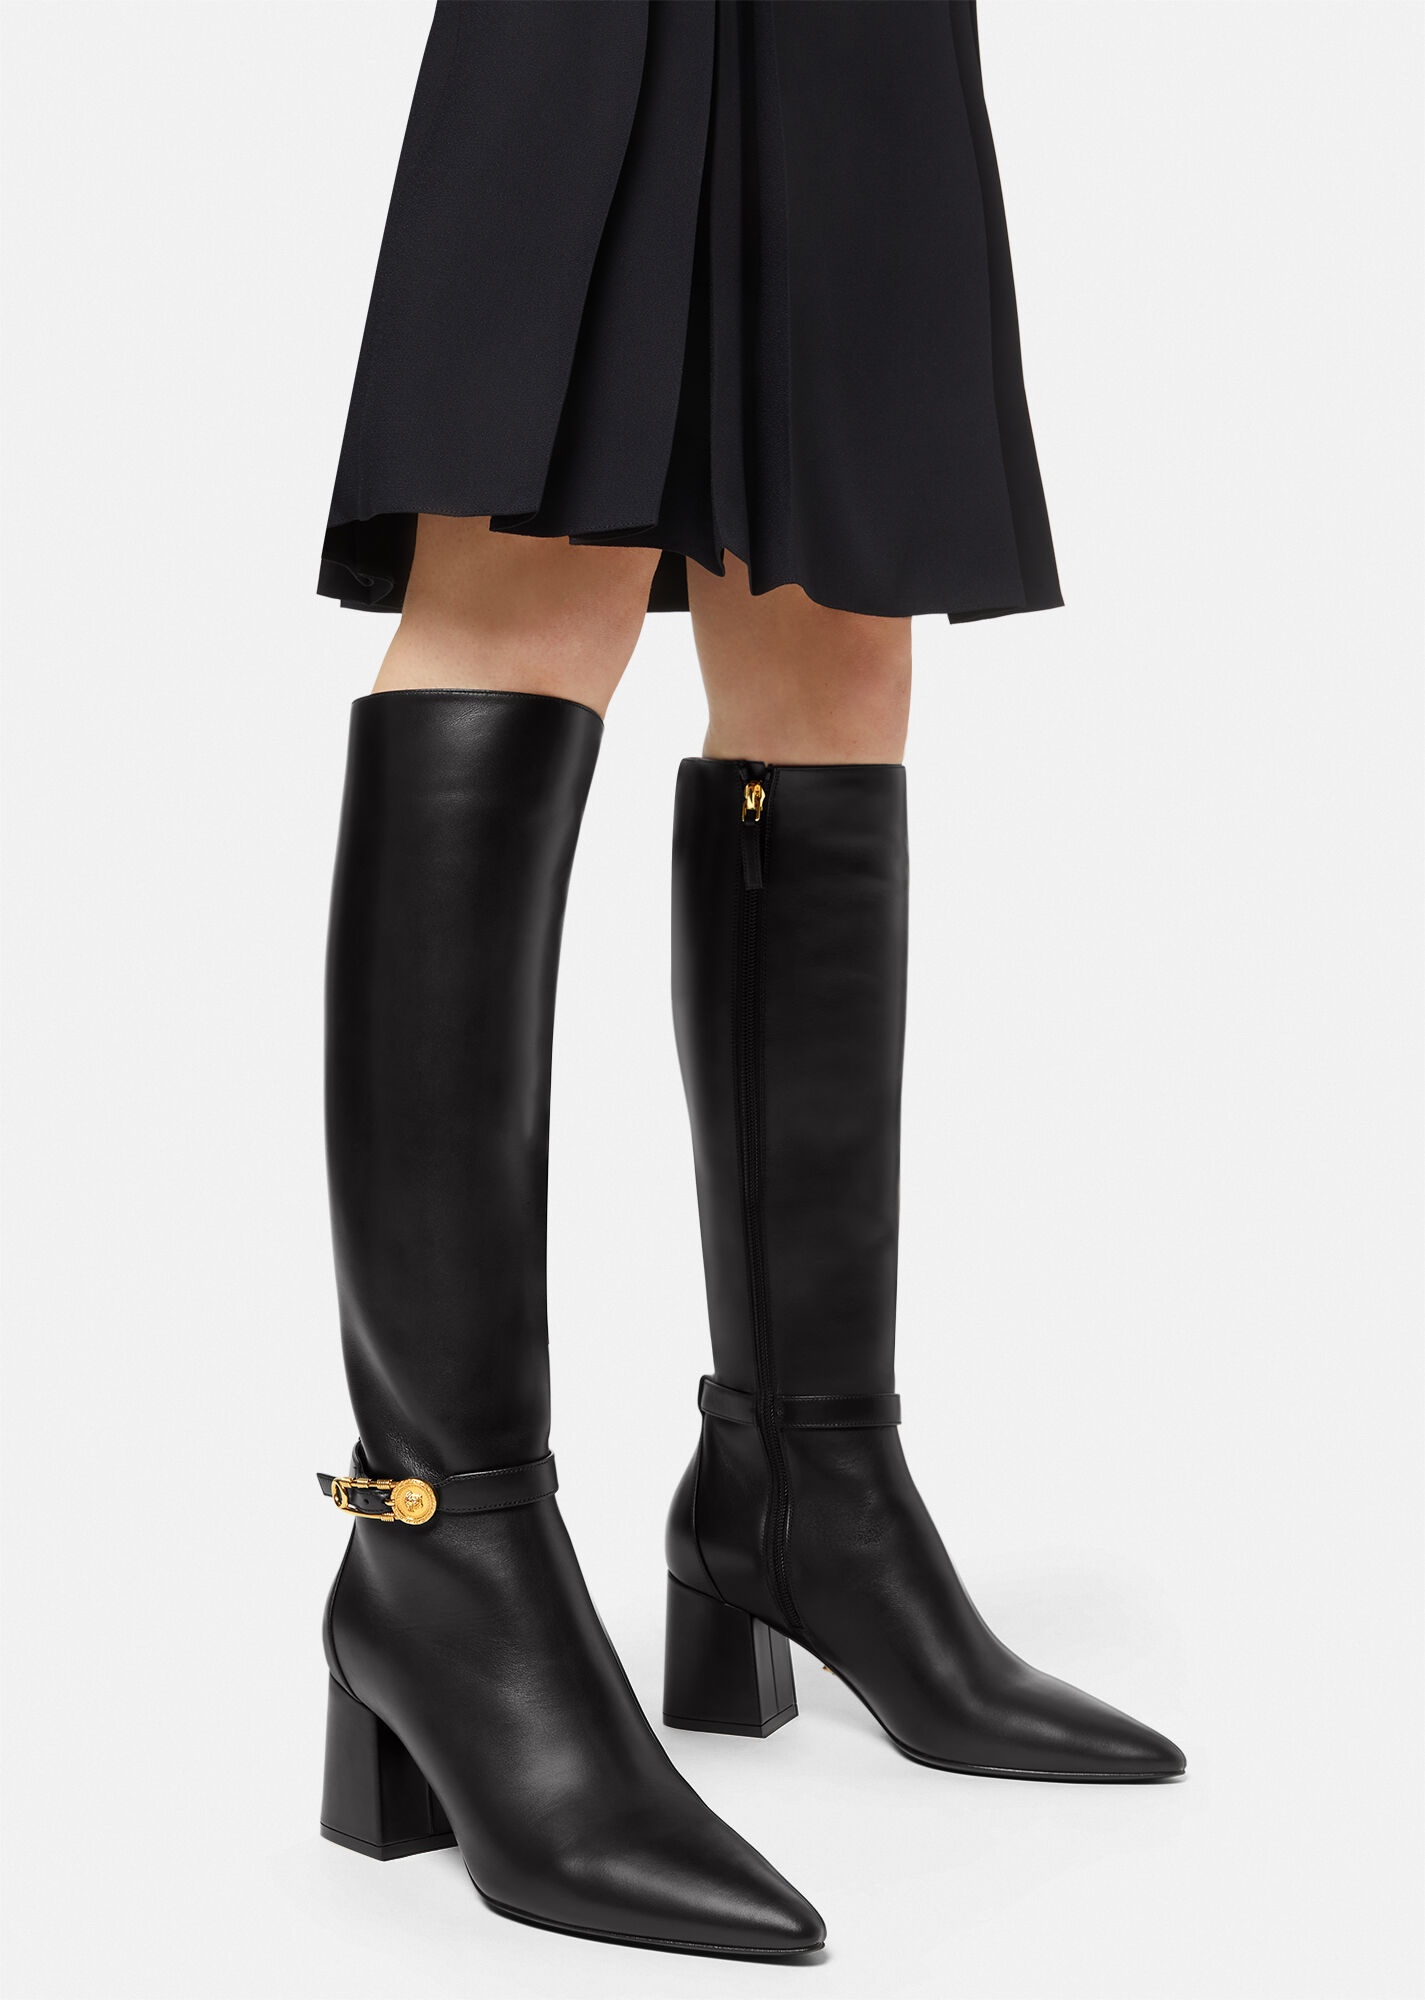 Safety Pin Knee High Boots - 5